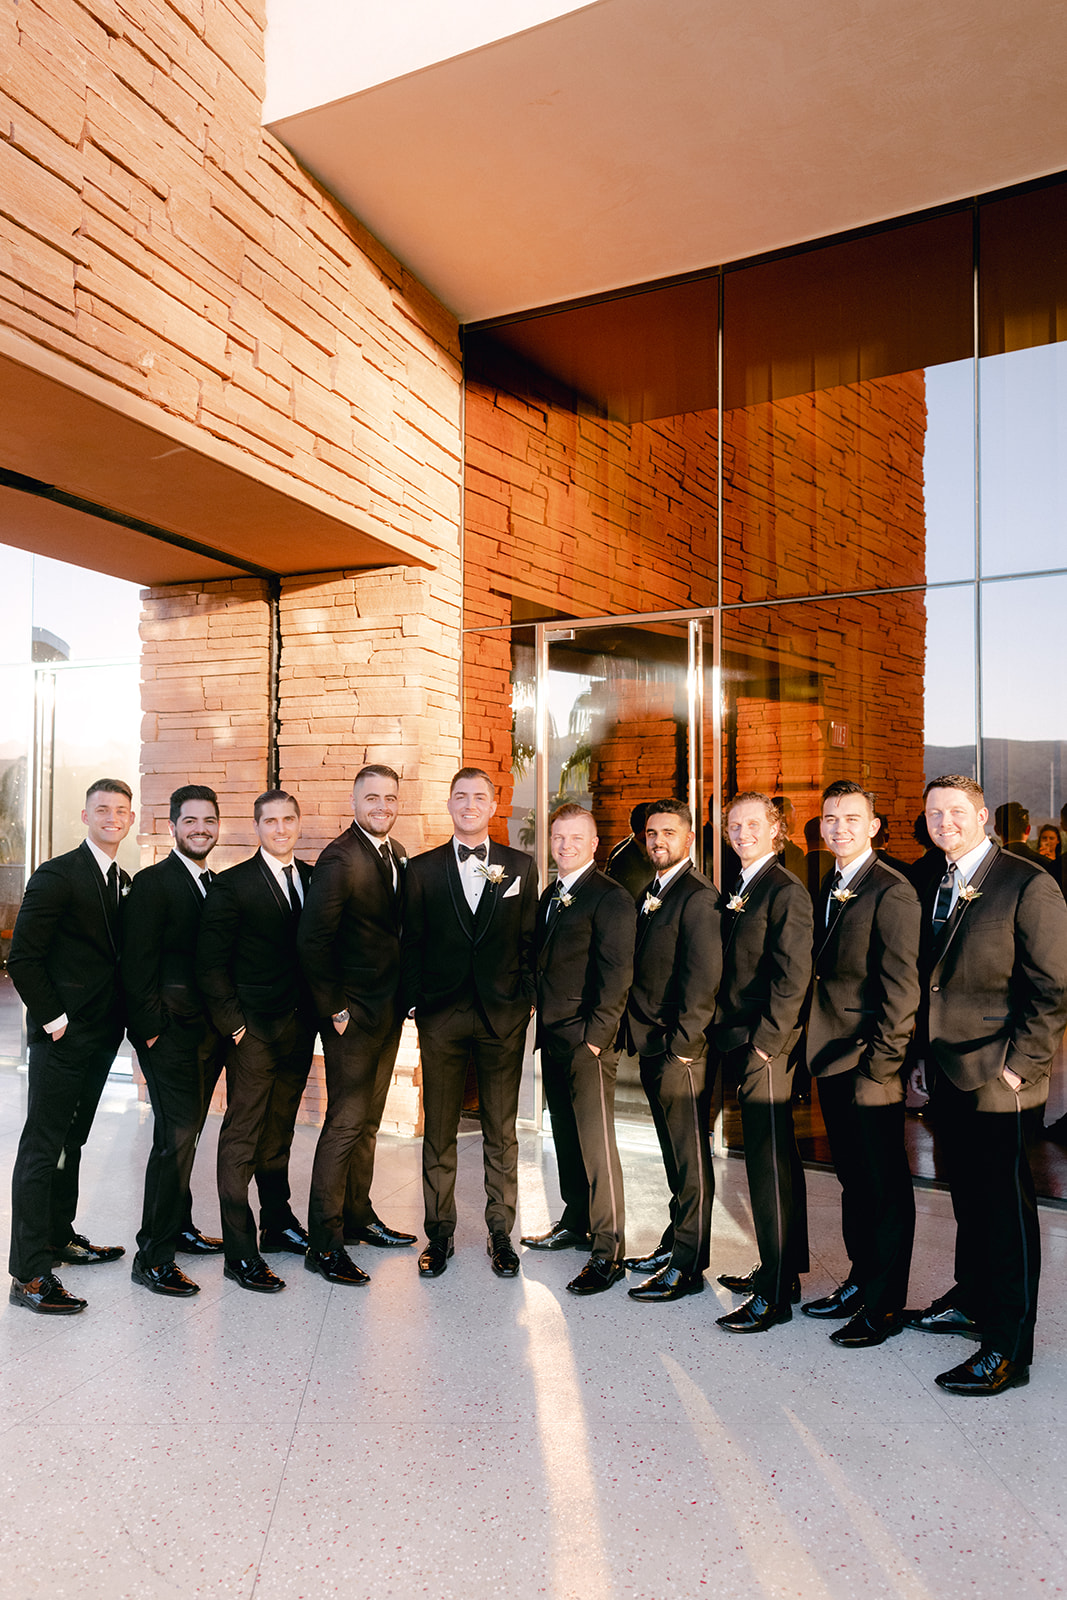 Groomsmen and groom in classic tuxedos for Red Rock Casino Timeless Modern Wedding 